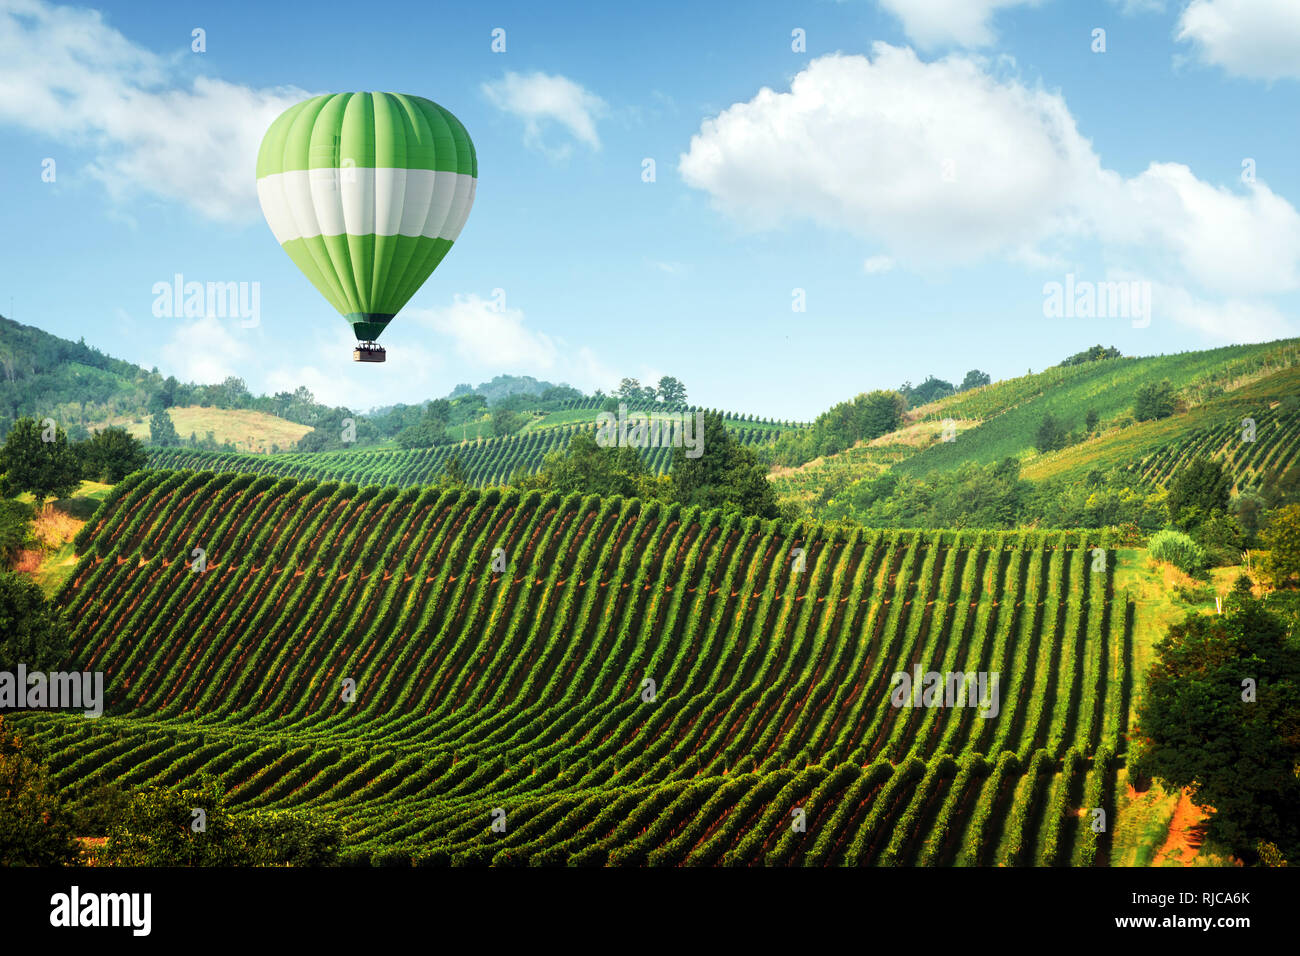 Amazing rural landscape with green balloon under vineyard on Italy hills. Vine making background Stock Photo